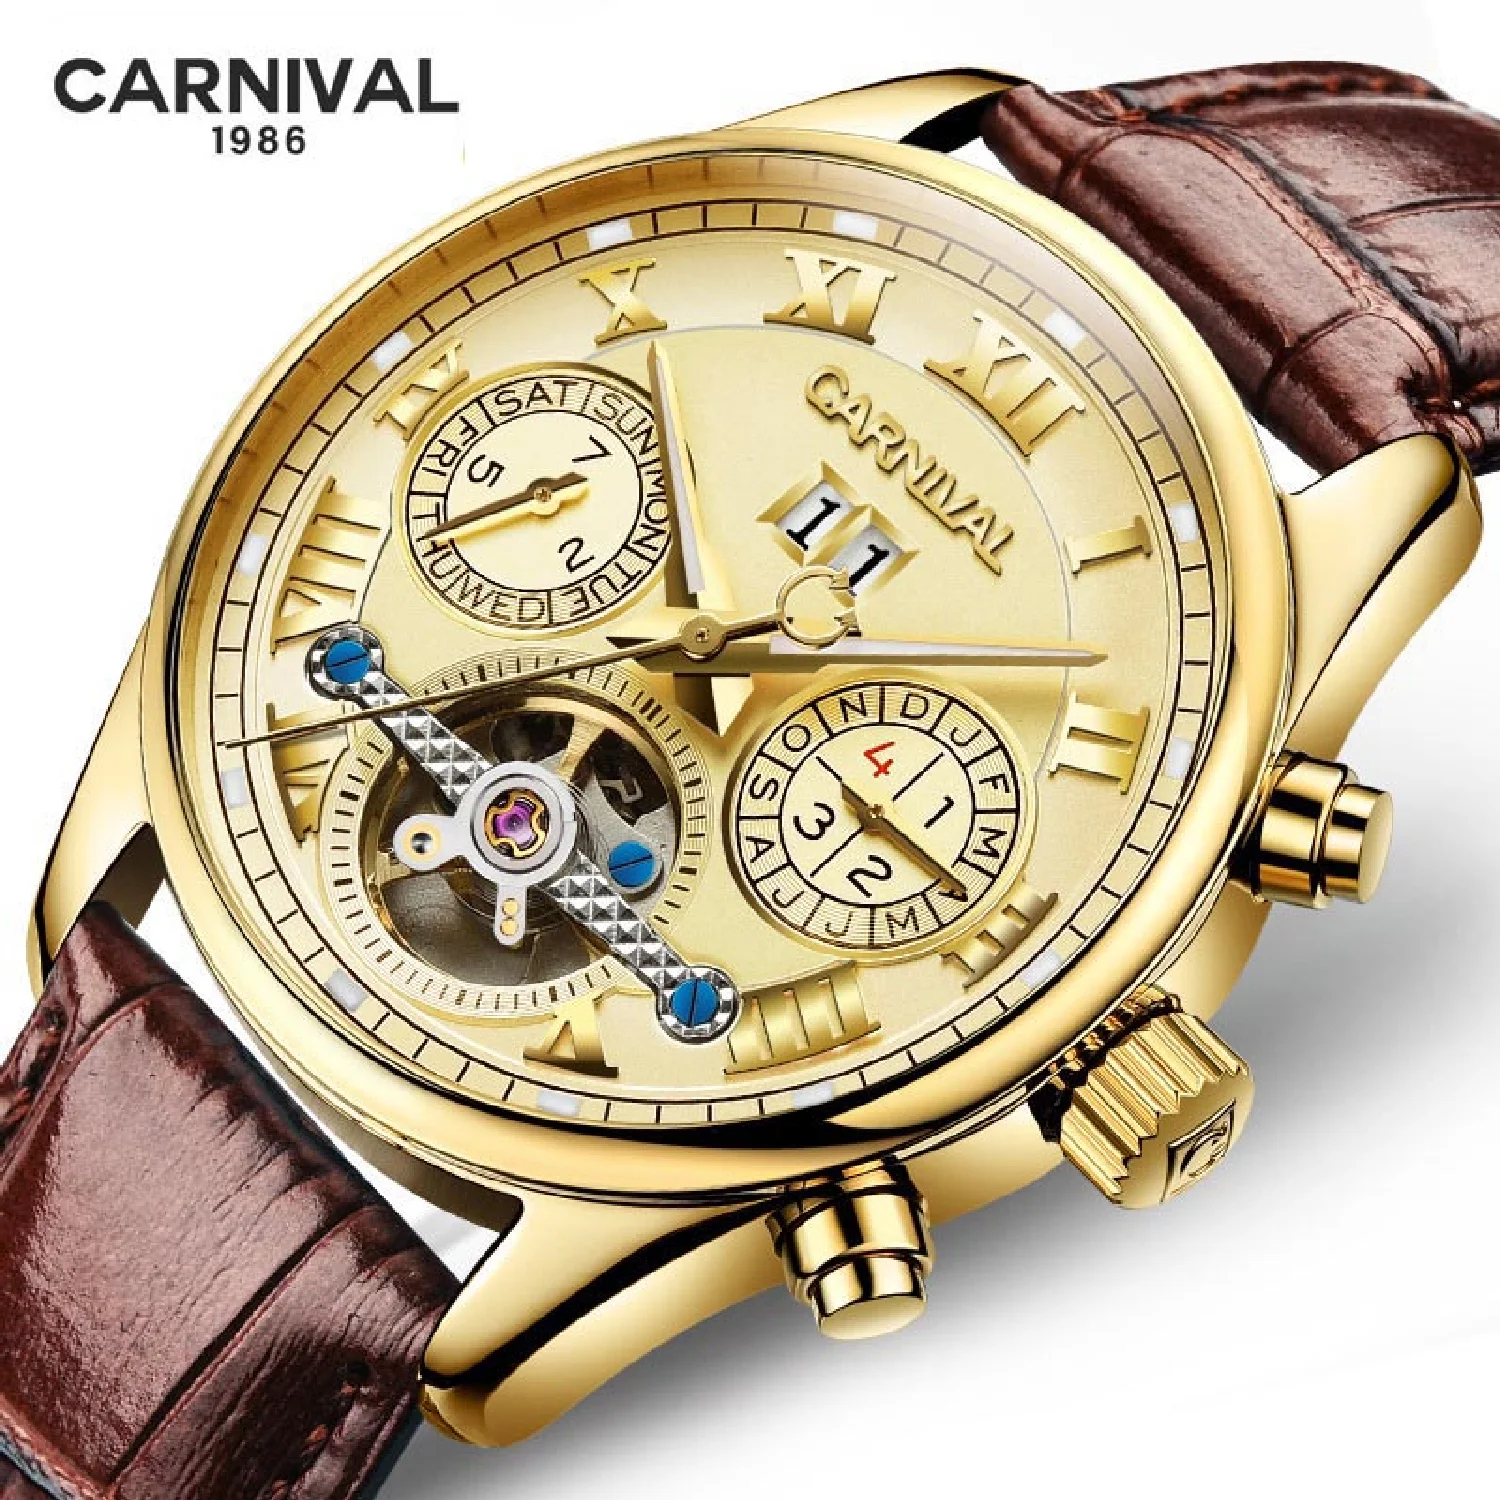 

CARNIVAL Luxury Automatic Mechanical Watch Men Luminous Date Tourbillon Watches Gold Steel Case Relogios Masculinos